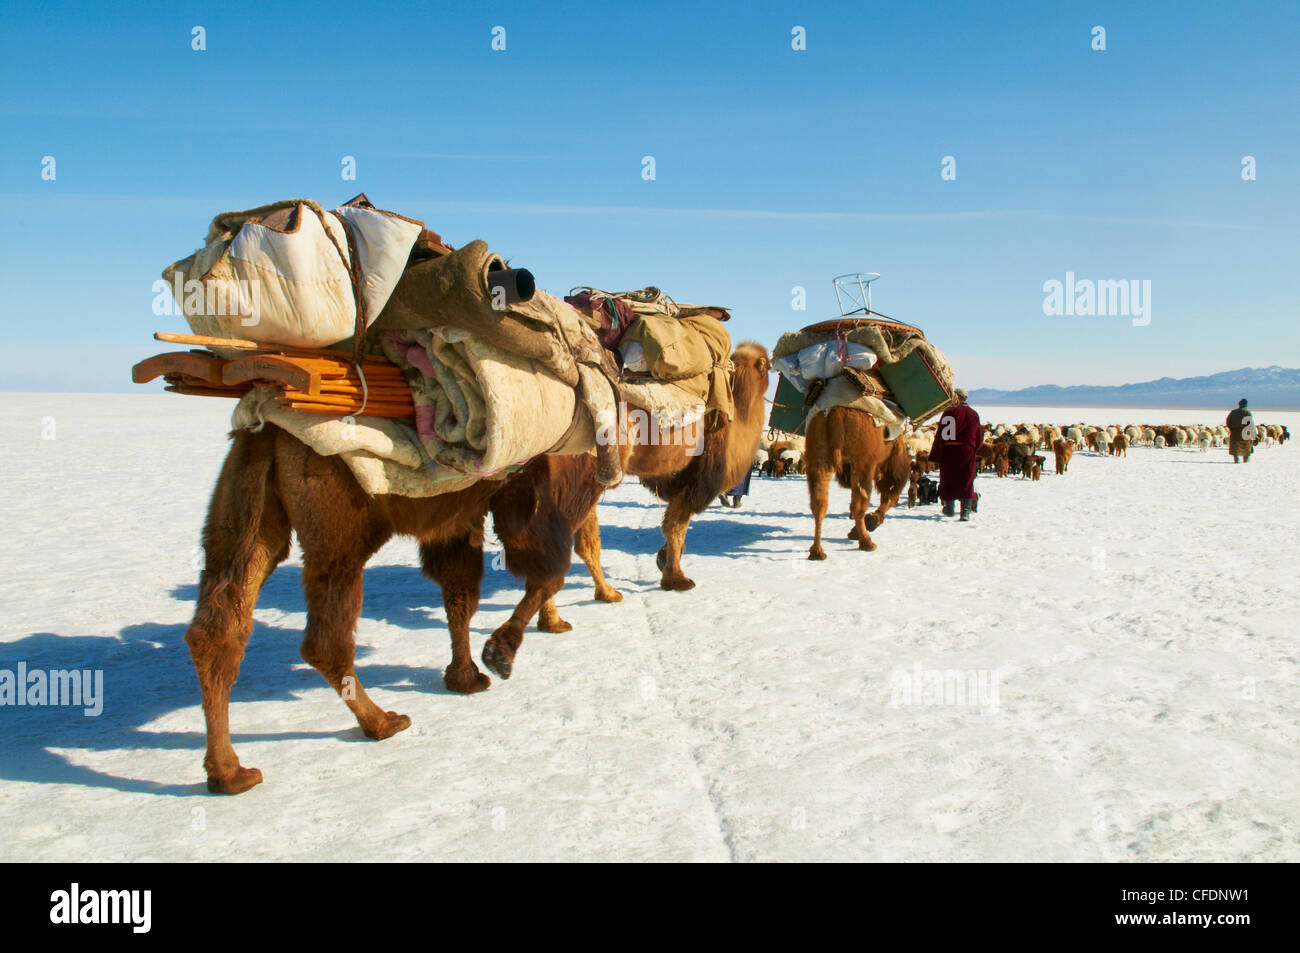 Nomadic transhumance with Bactrian camels in snow covered,landscape, Province of Khovd, Mongolia, Central Asia, Asia Stock Photo